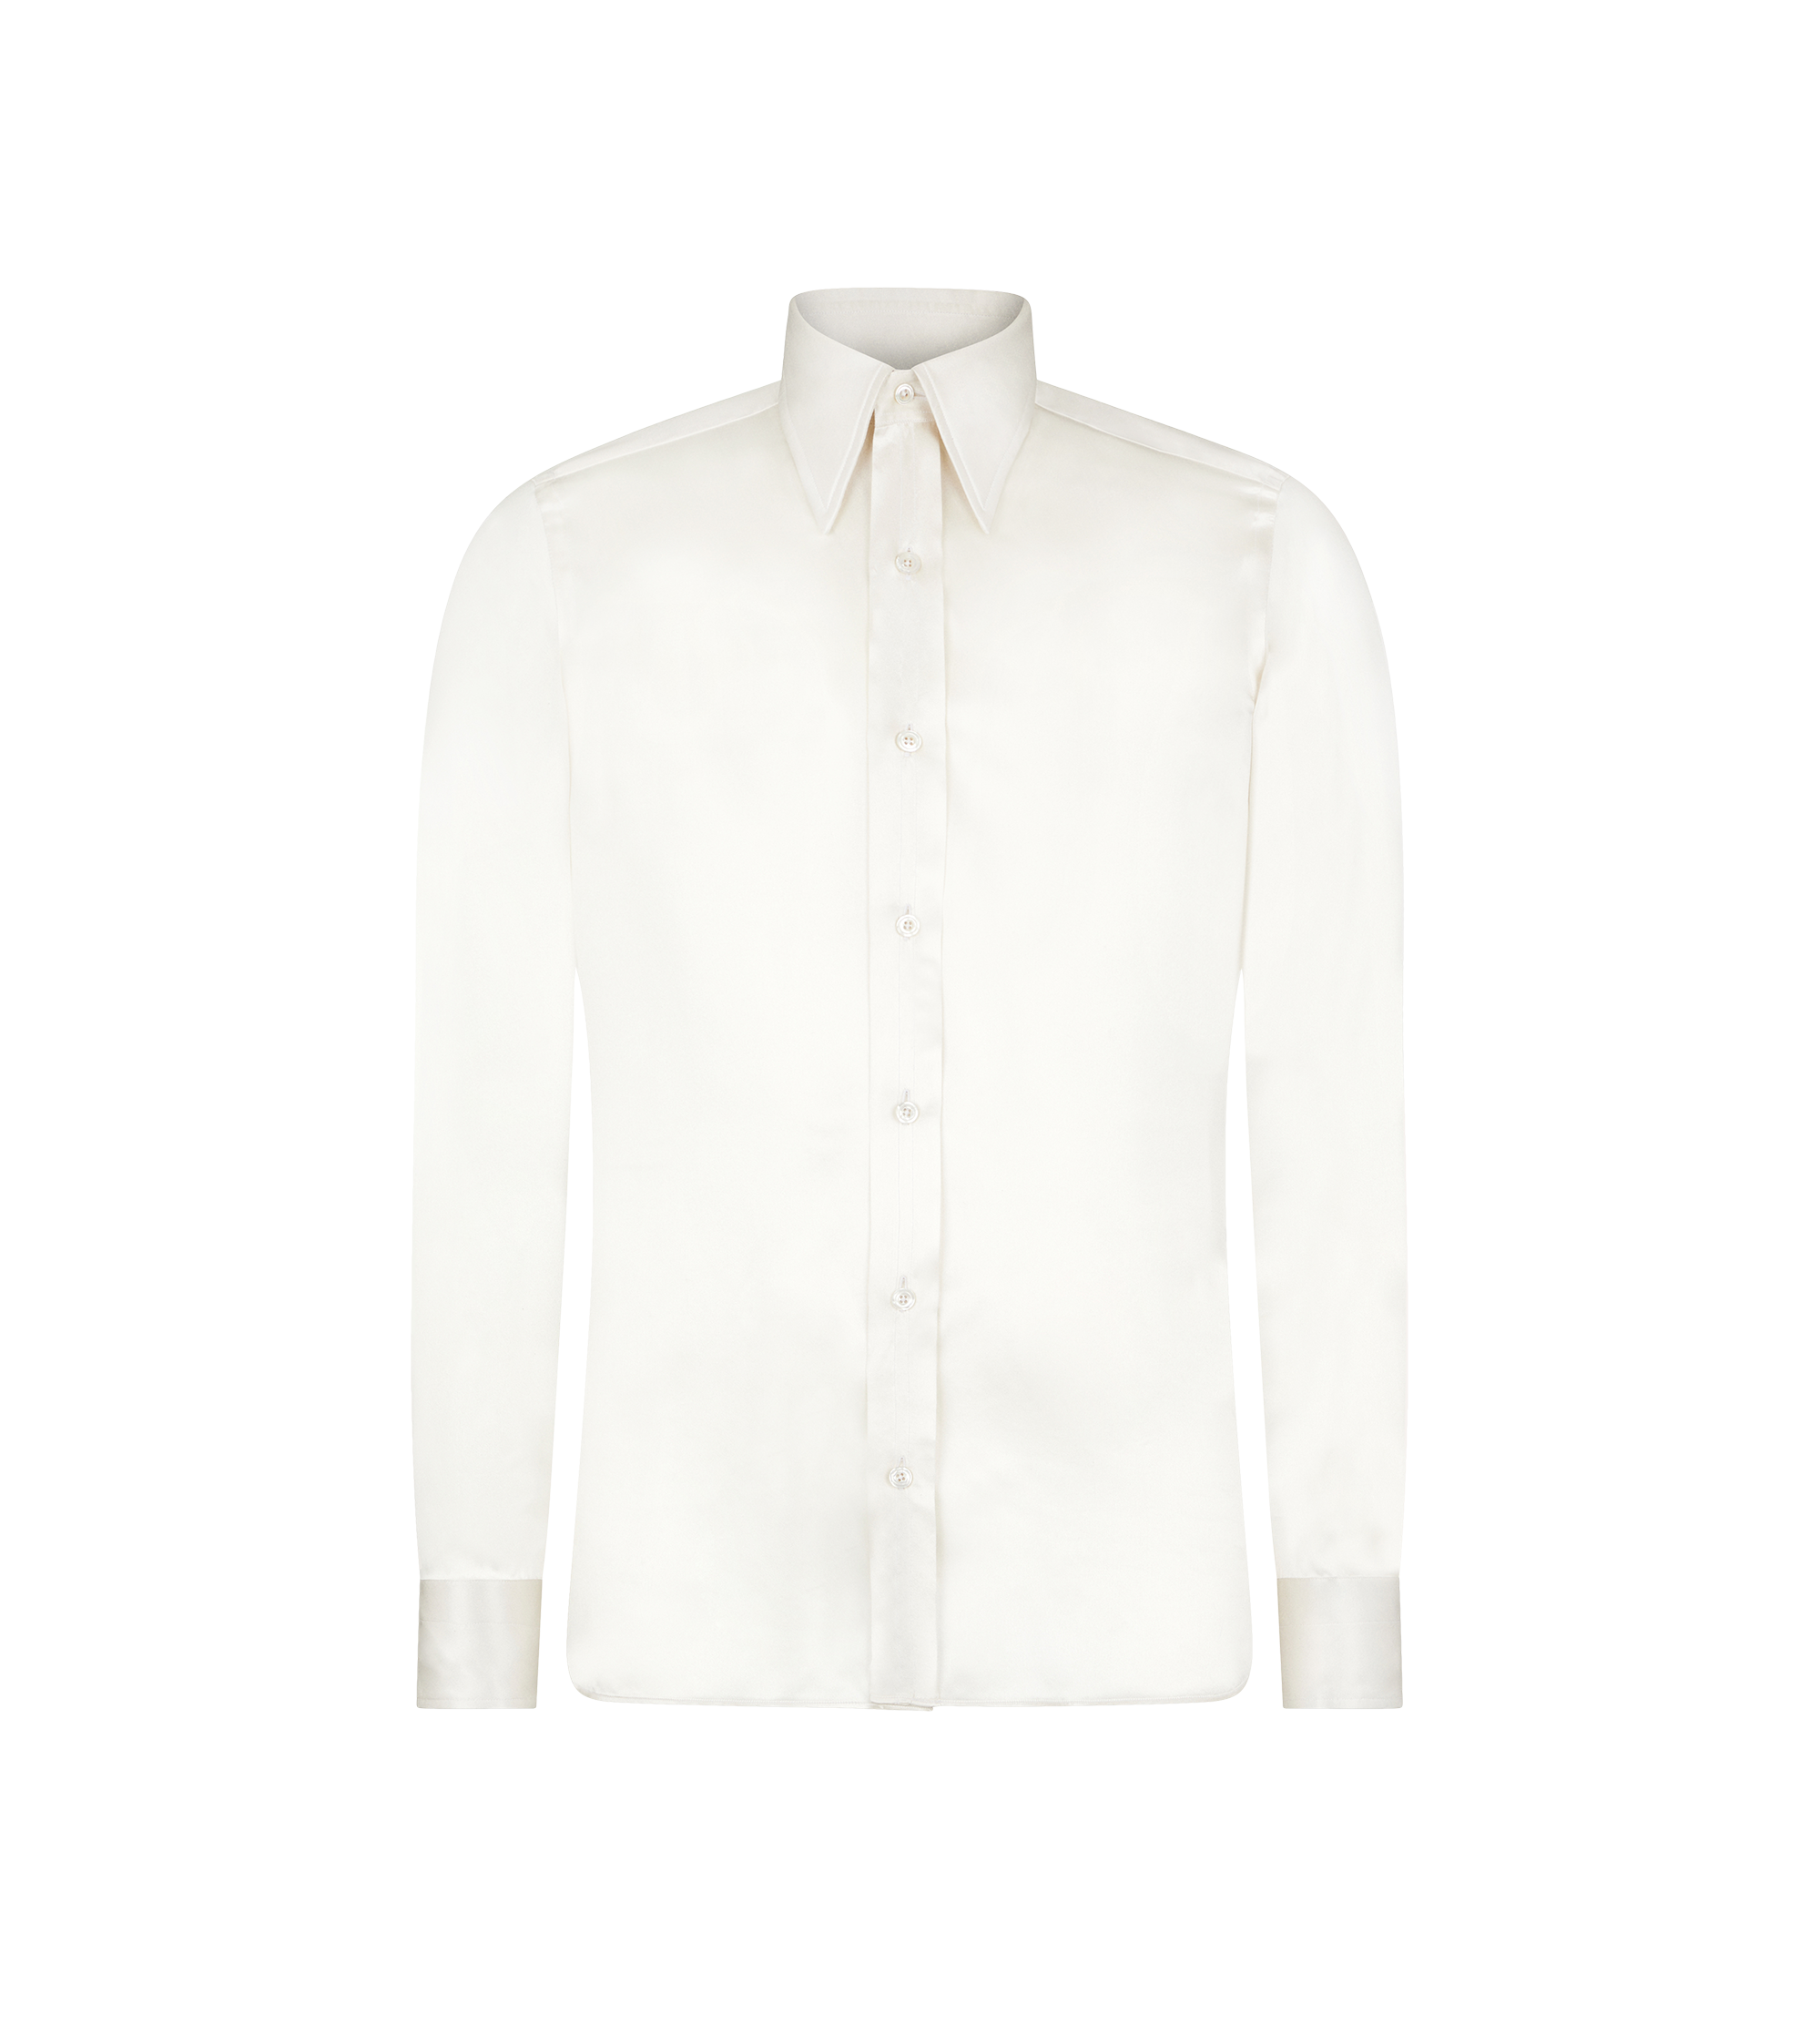 TOM FORD Off-White Spread Collar Shirt